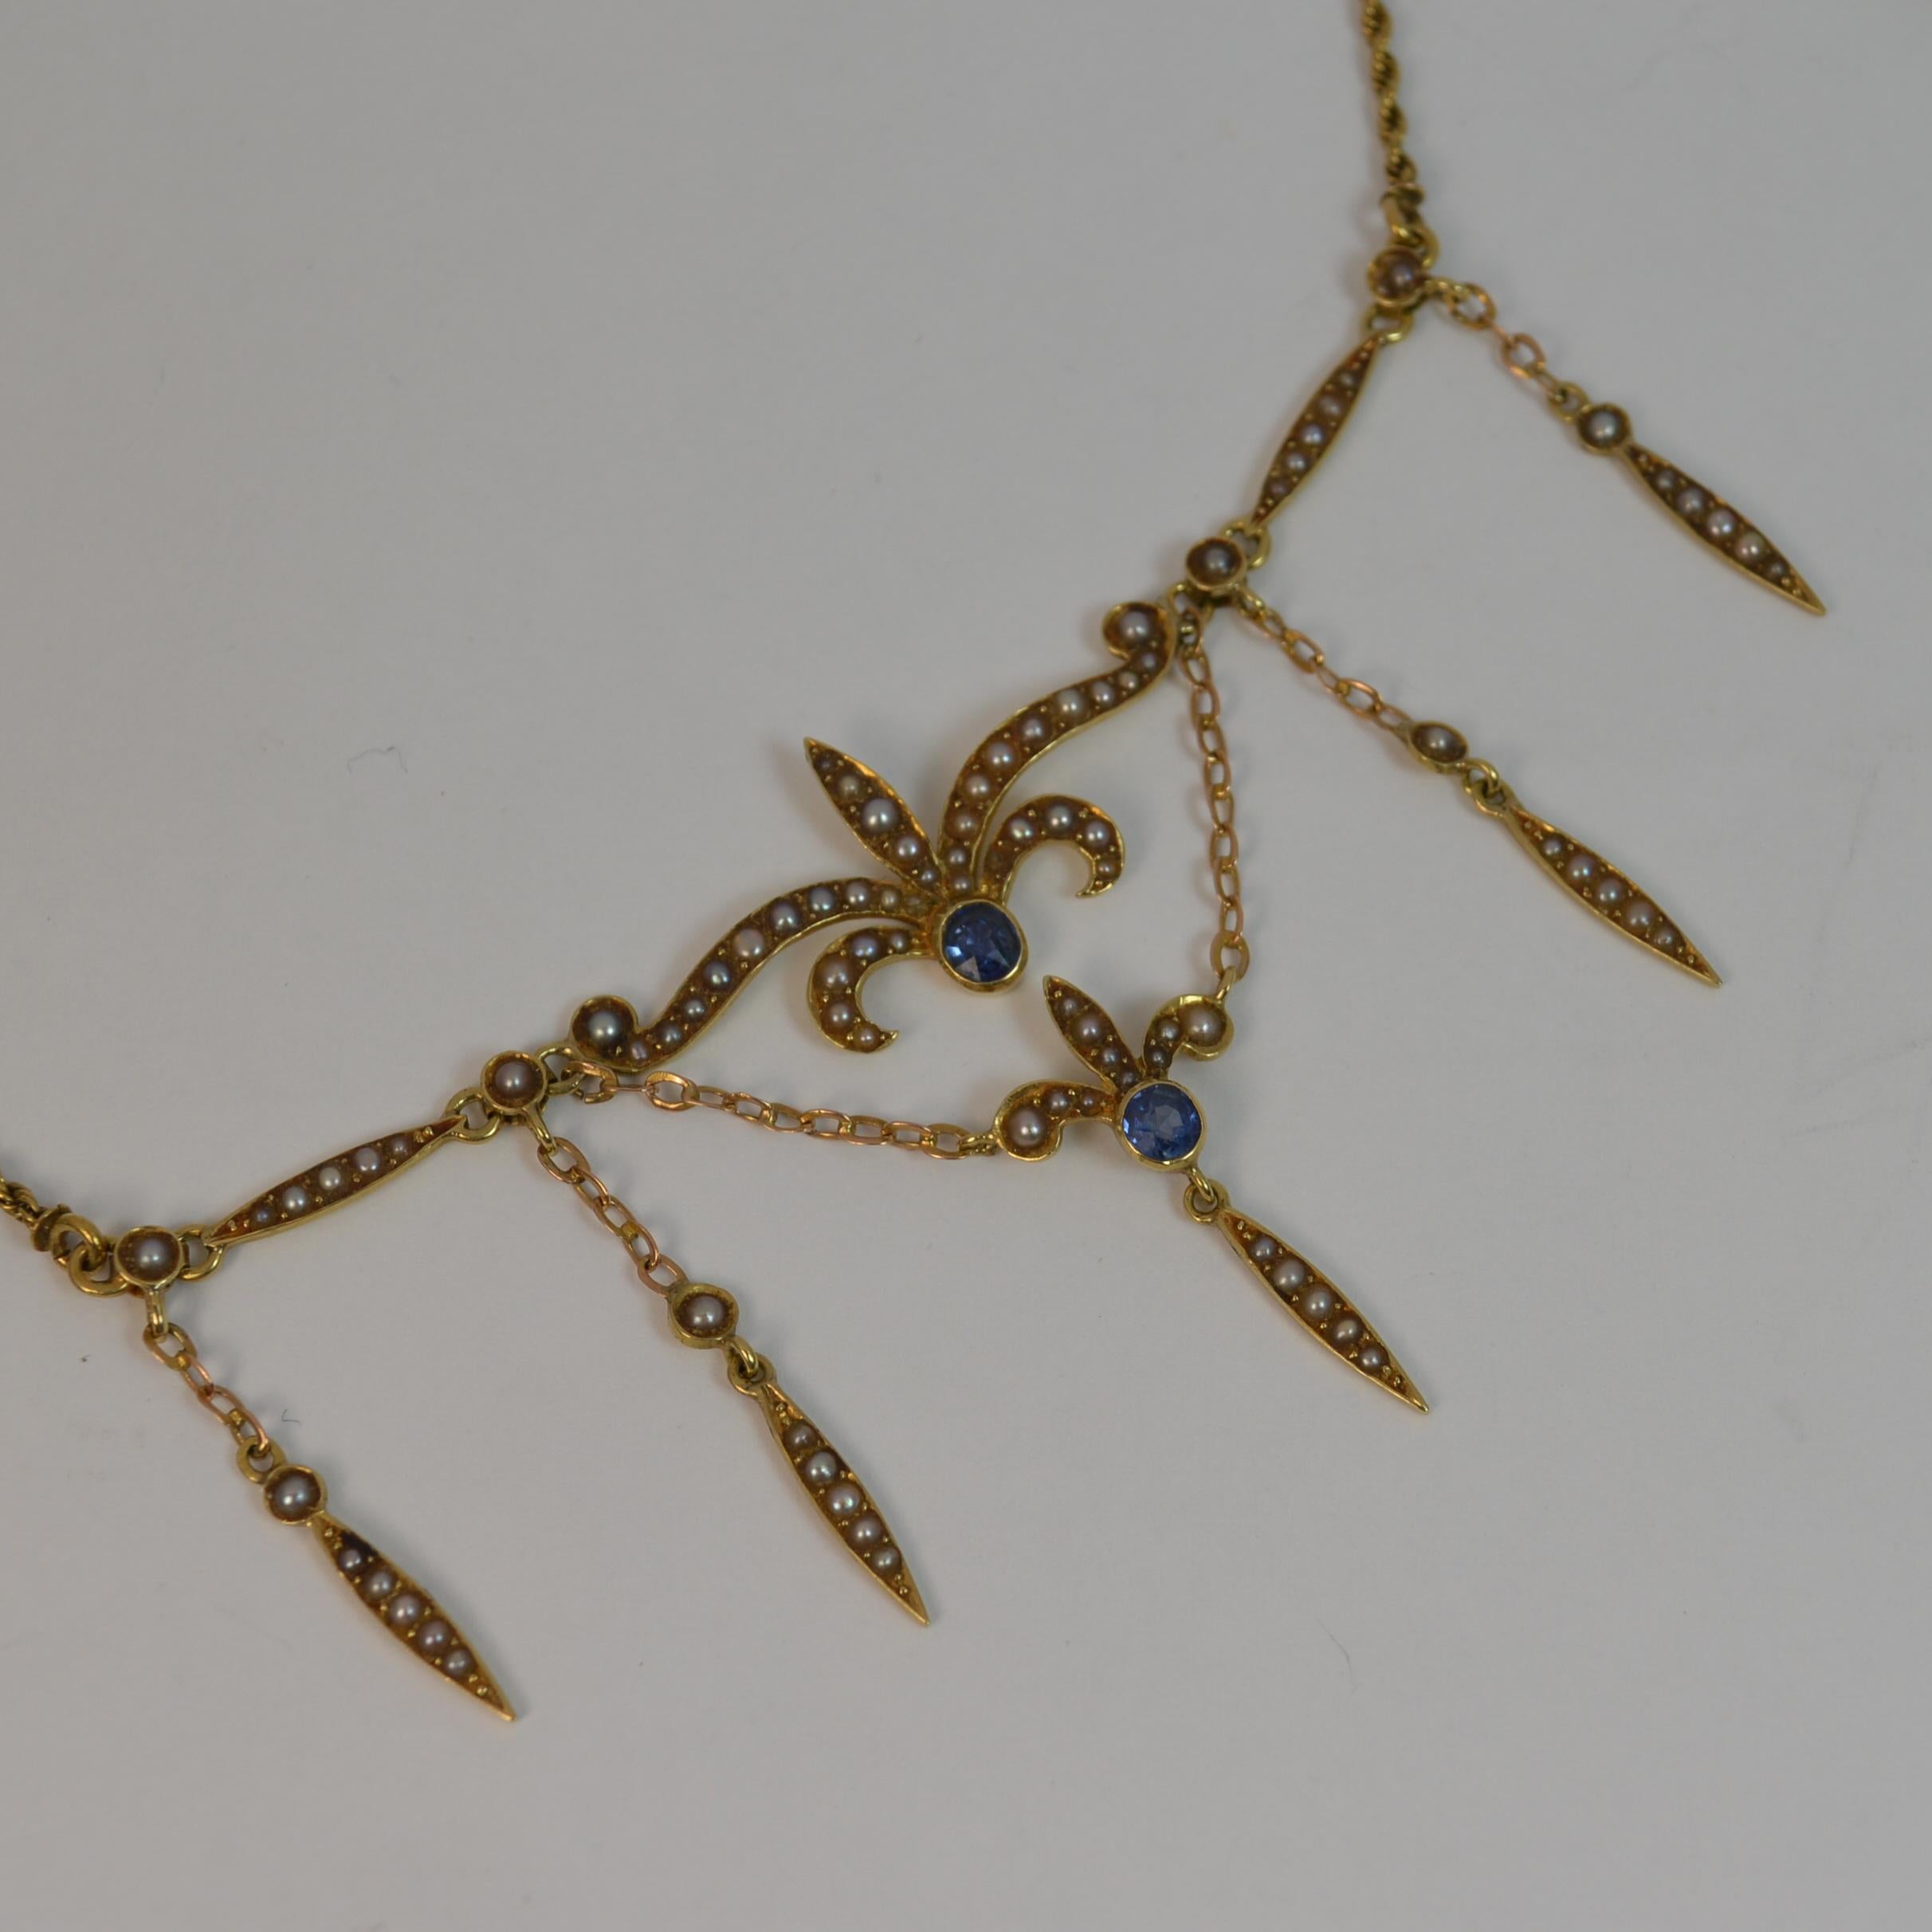 
A superb quality ladies necklace chain pendant.

Solid 15 carat yellow gold example throughout.

Beautiful design with the seed pearl and sapphire with rope twist chain to each side.

True antique example, circa 1880.


CONDITION ; Very good. Clean